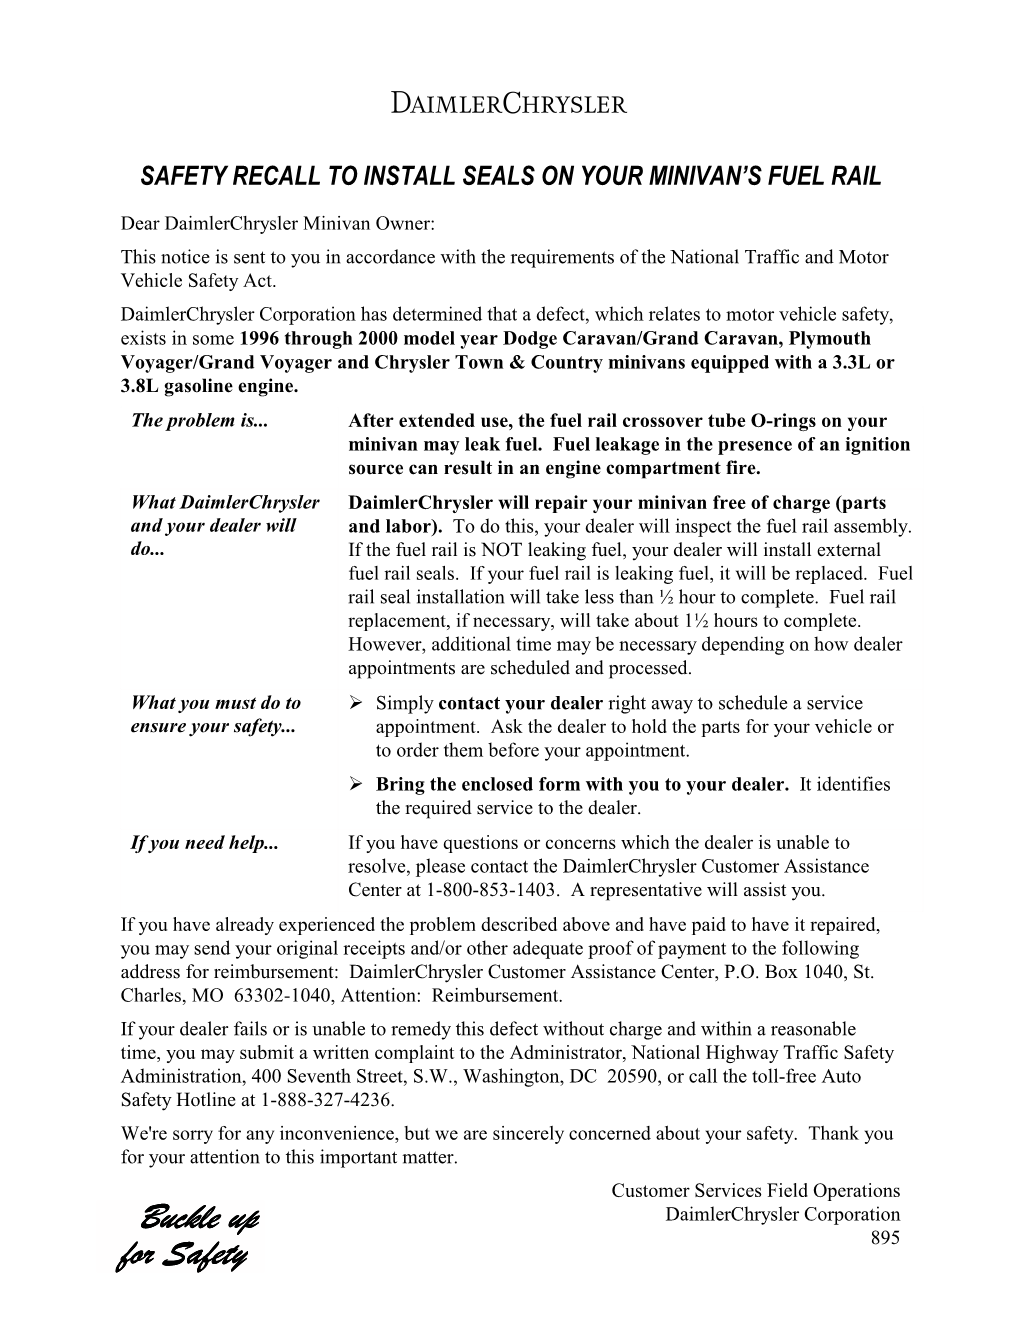 Safety Recall to Install Seals on Your Minivan's Fuel Rail